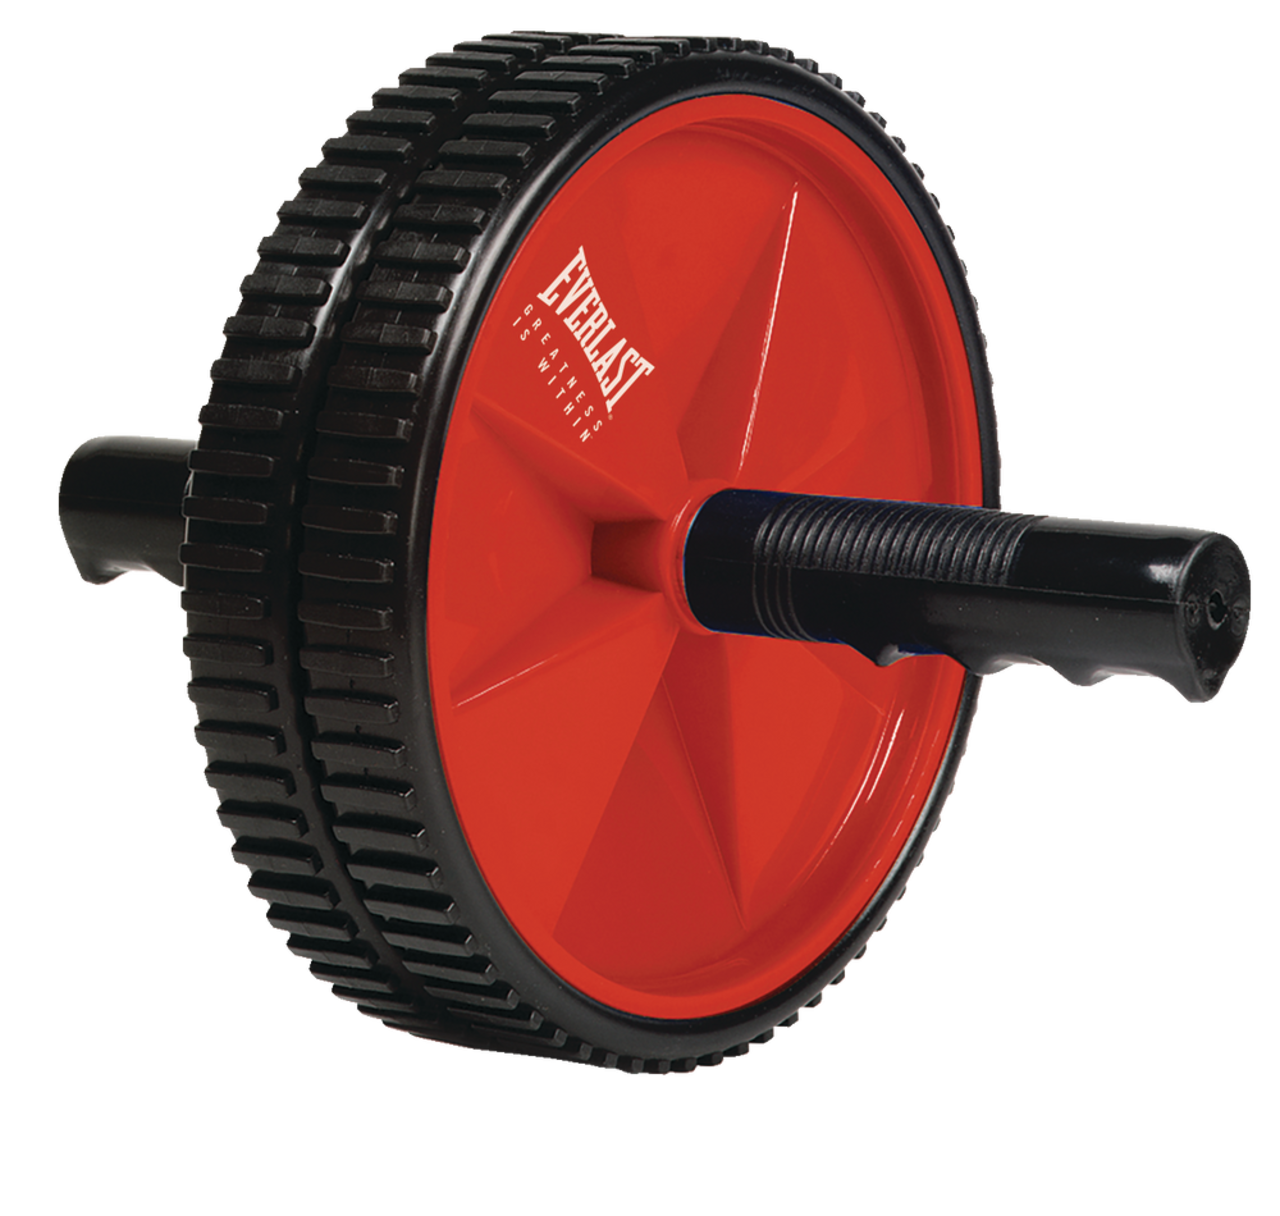 https://media-www.canadiantire.ca/product/playing/exercise/exercise-accessories/1841229/everlast-ab-wheel-360346d7-aa8f-4873-94e0-b3d3ea6271c2.png?imdensity=1&imwidth=640&impolicy=mZoom